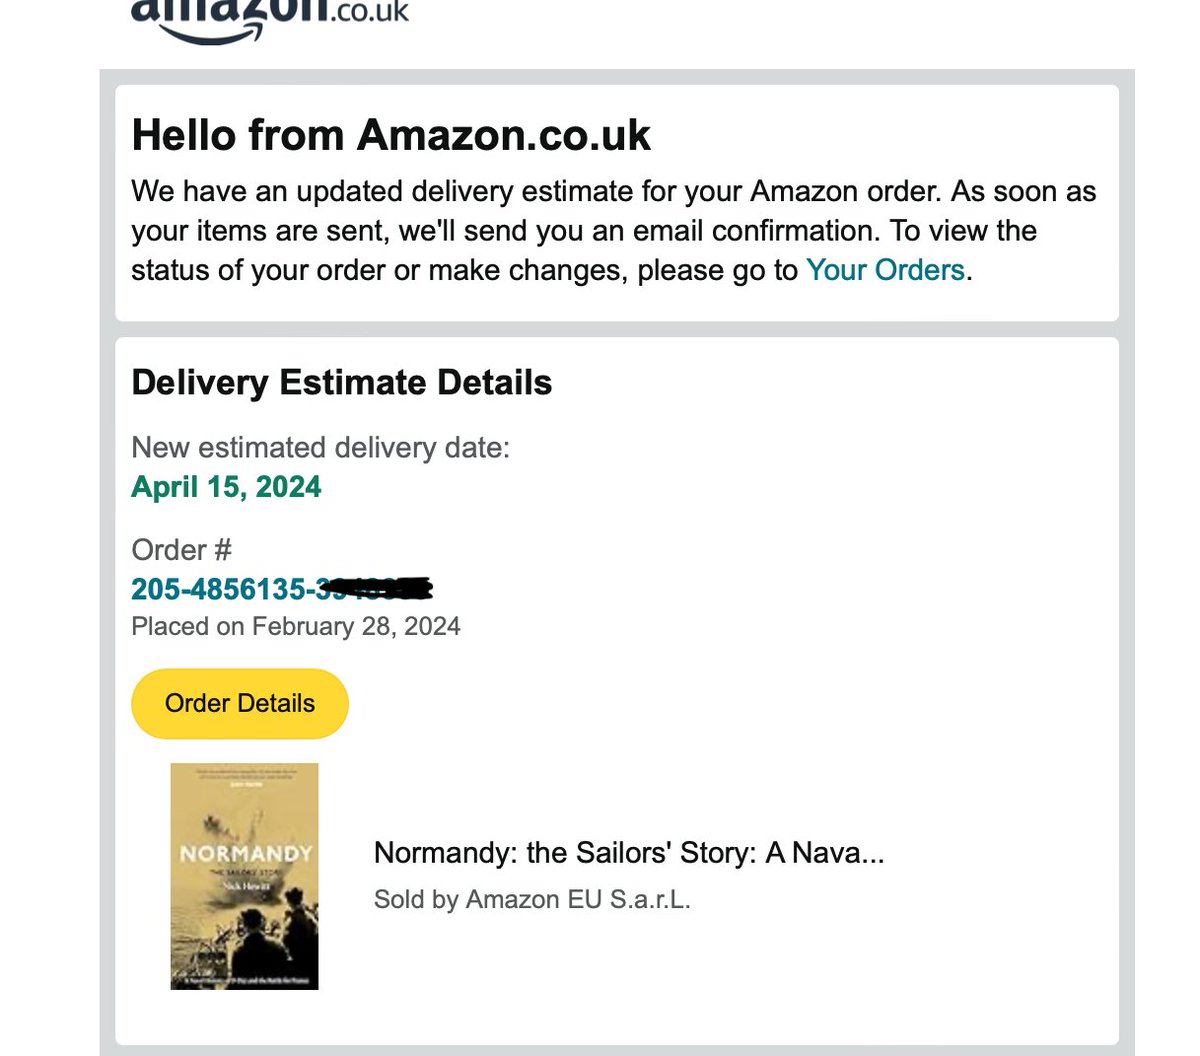 @NickHewitt4 @thehistoryguy @timbenbow1 @Tessadunlop @kejamieson_ Really looking forward to this. Sadly have to wait a little longer as my Amazon pre-order is delayed. 🙁